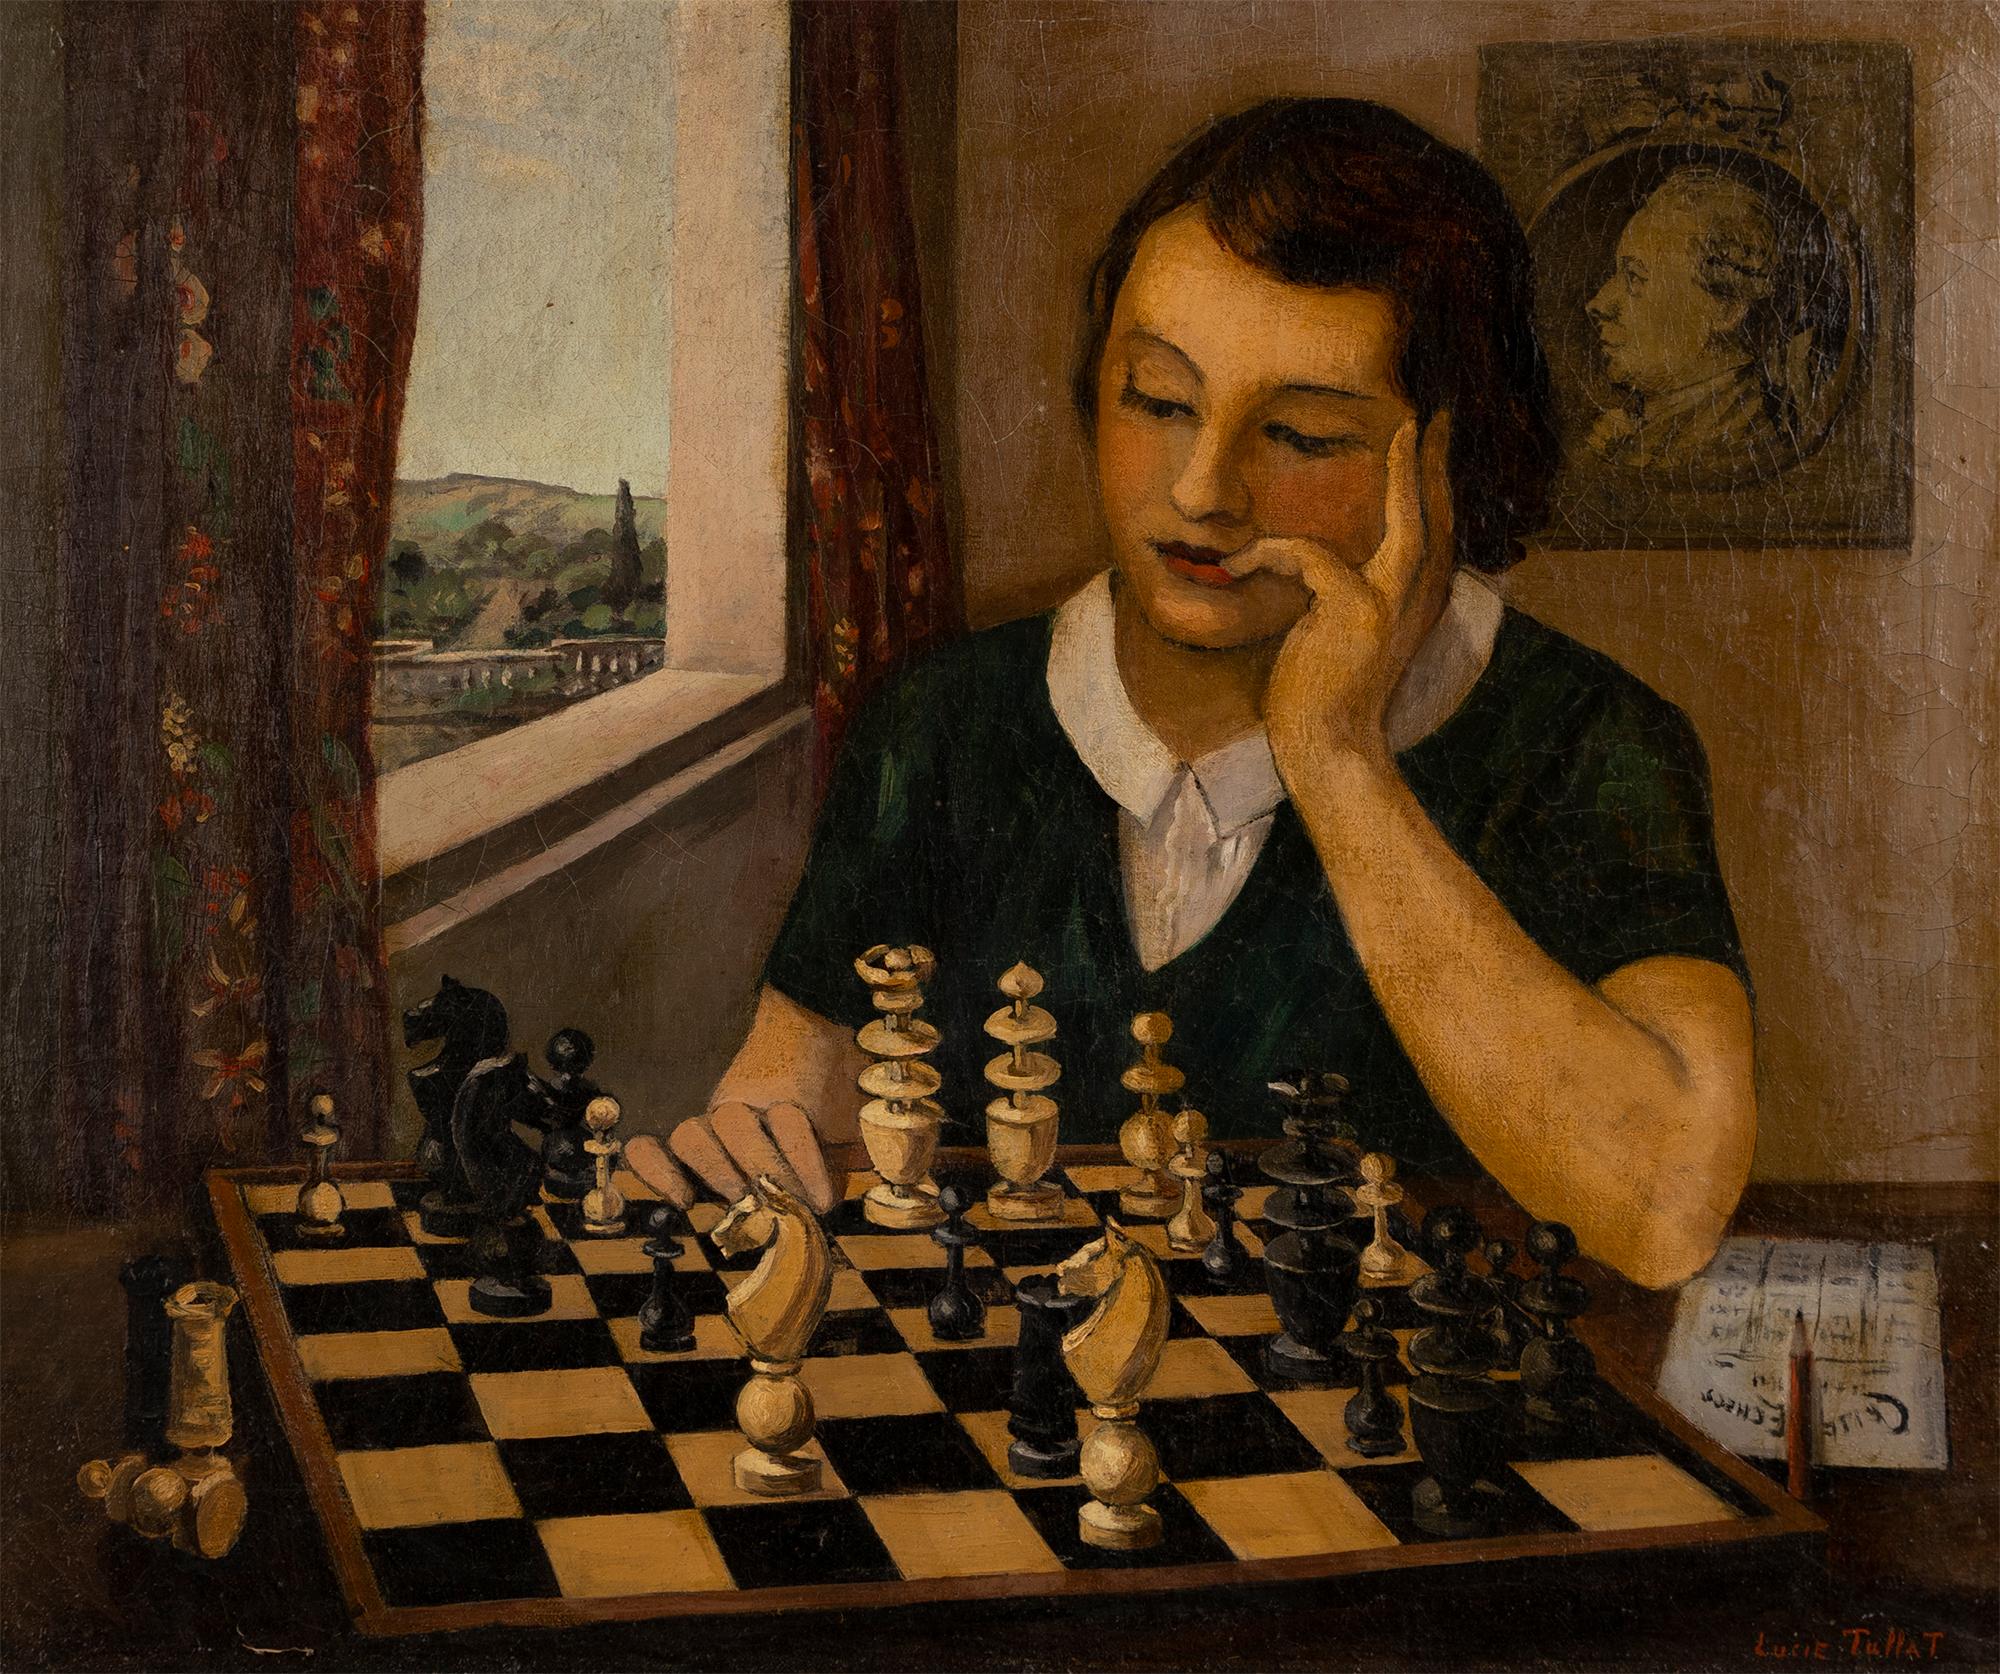 Antique American Chess Master Interior Portrait Signed 19th Century Oil Painting - Brown Figurative Painting by Unknown